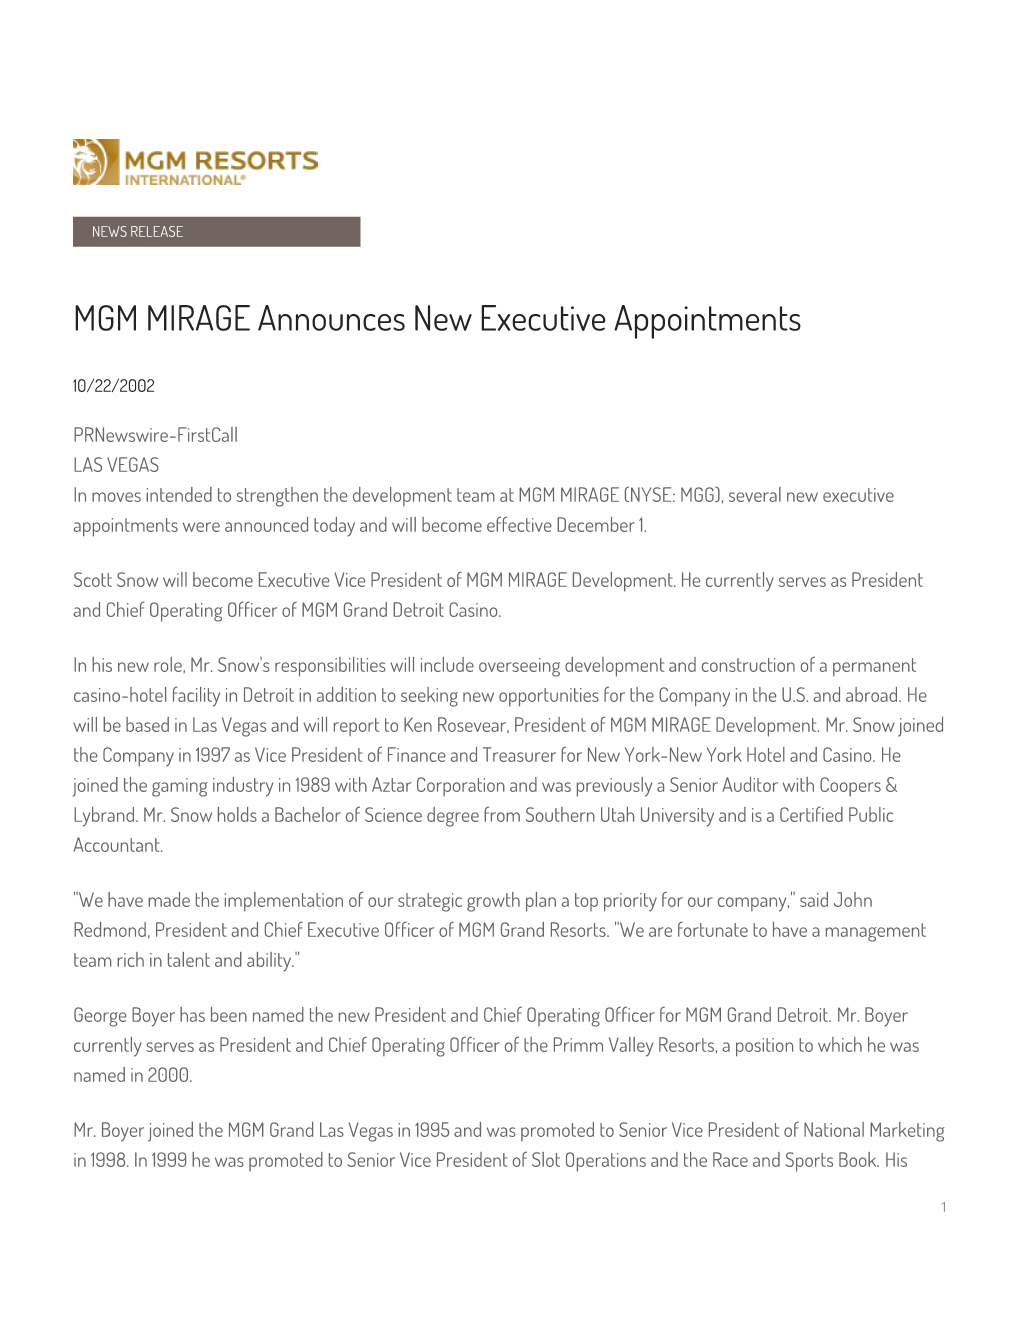 MGM MIRAGE Announces New Executive Appointments